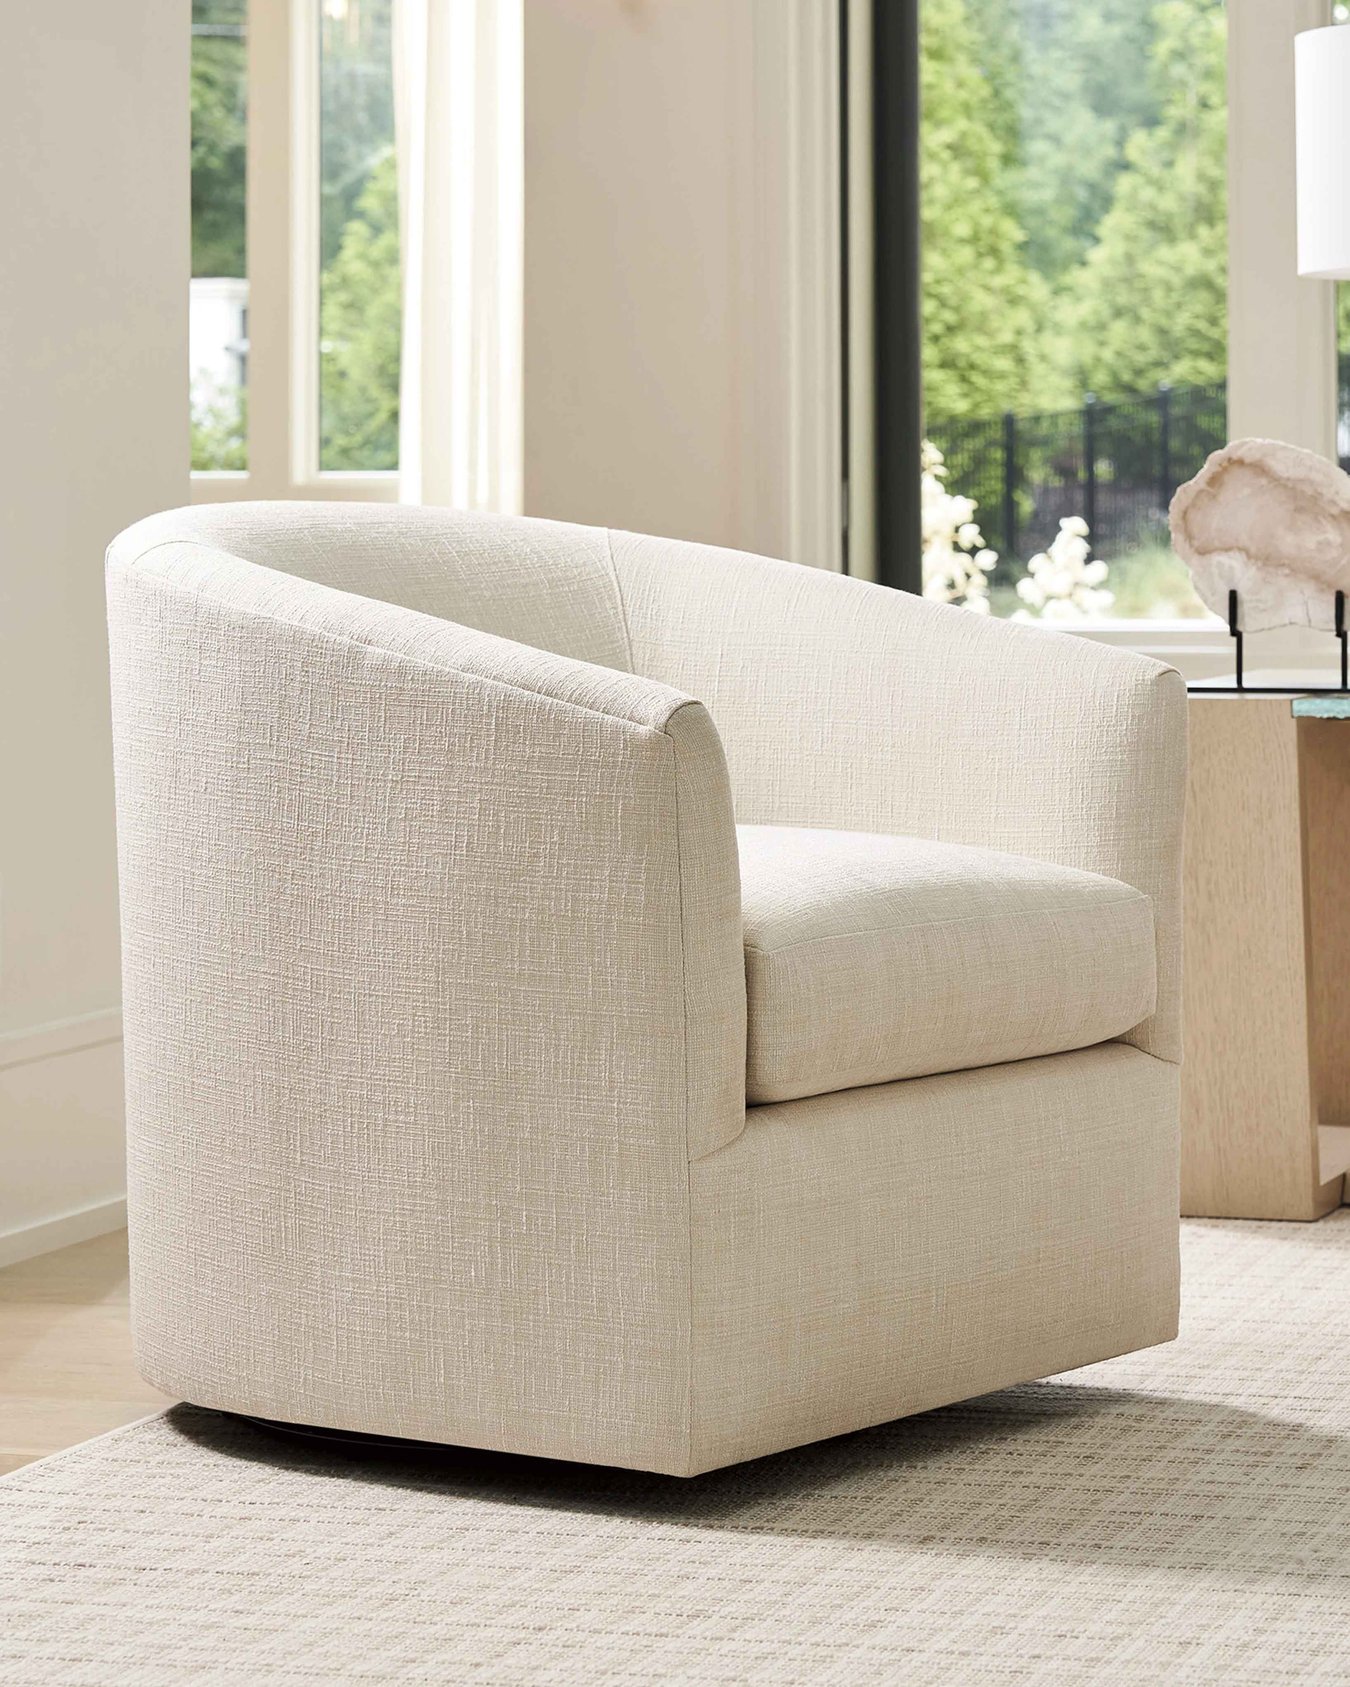 A white chair by a window, offering a cozy spot to relax and enjoy the view.